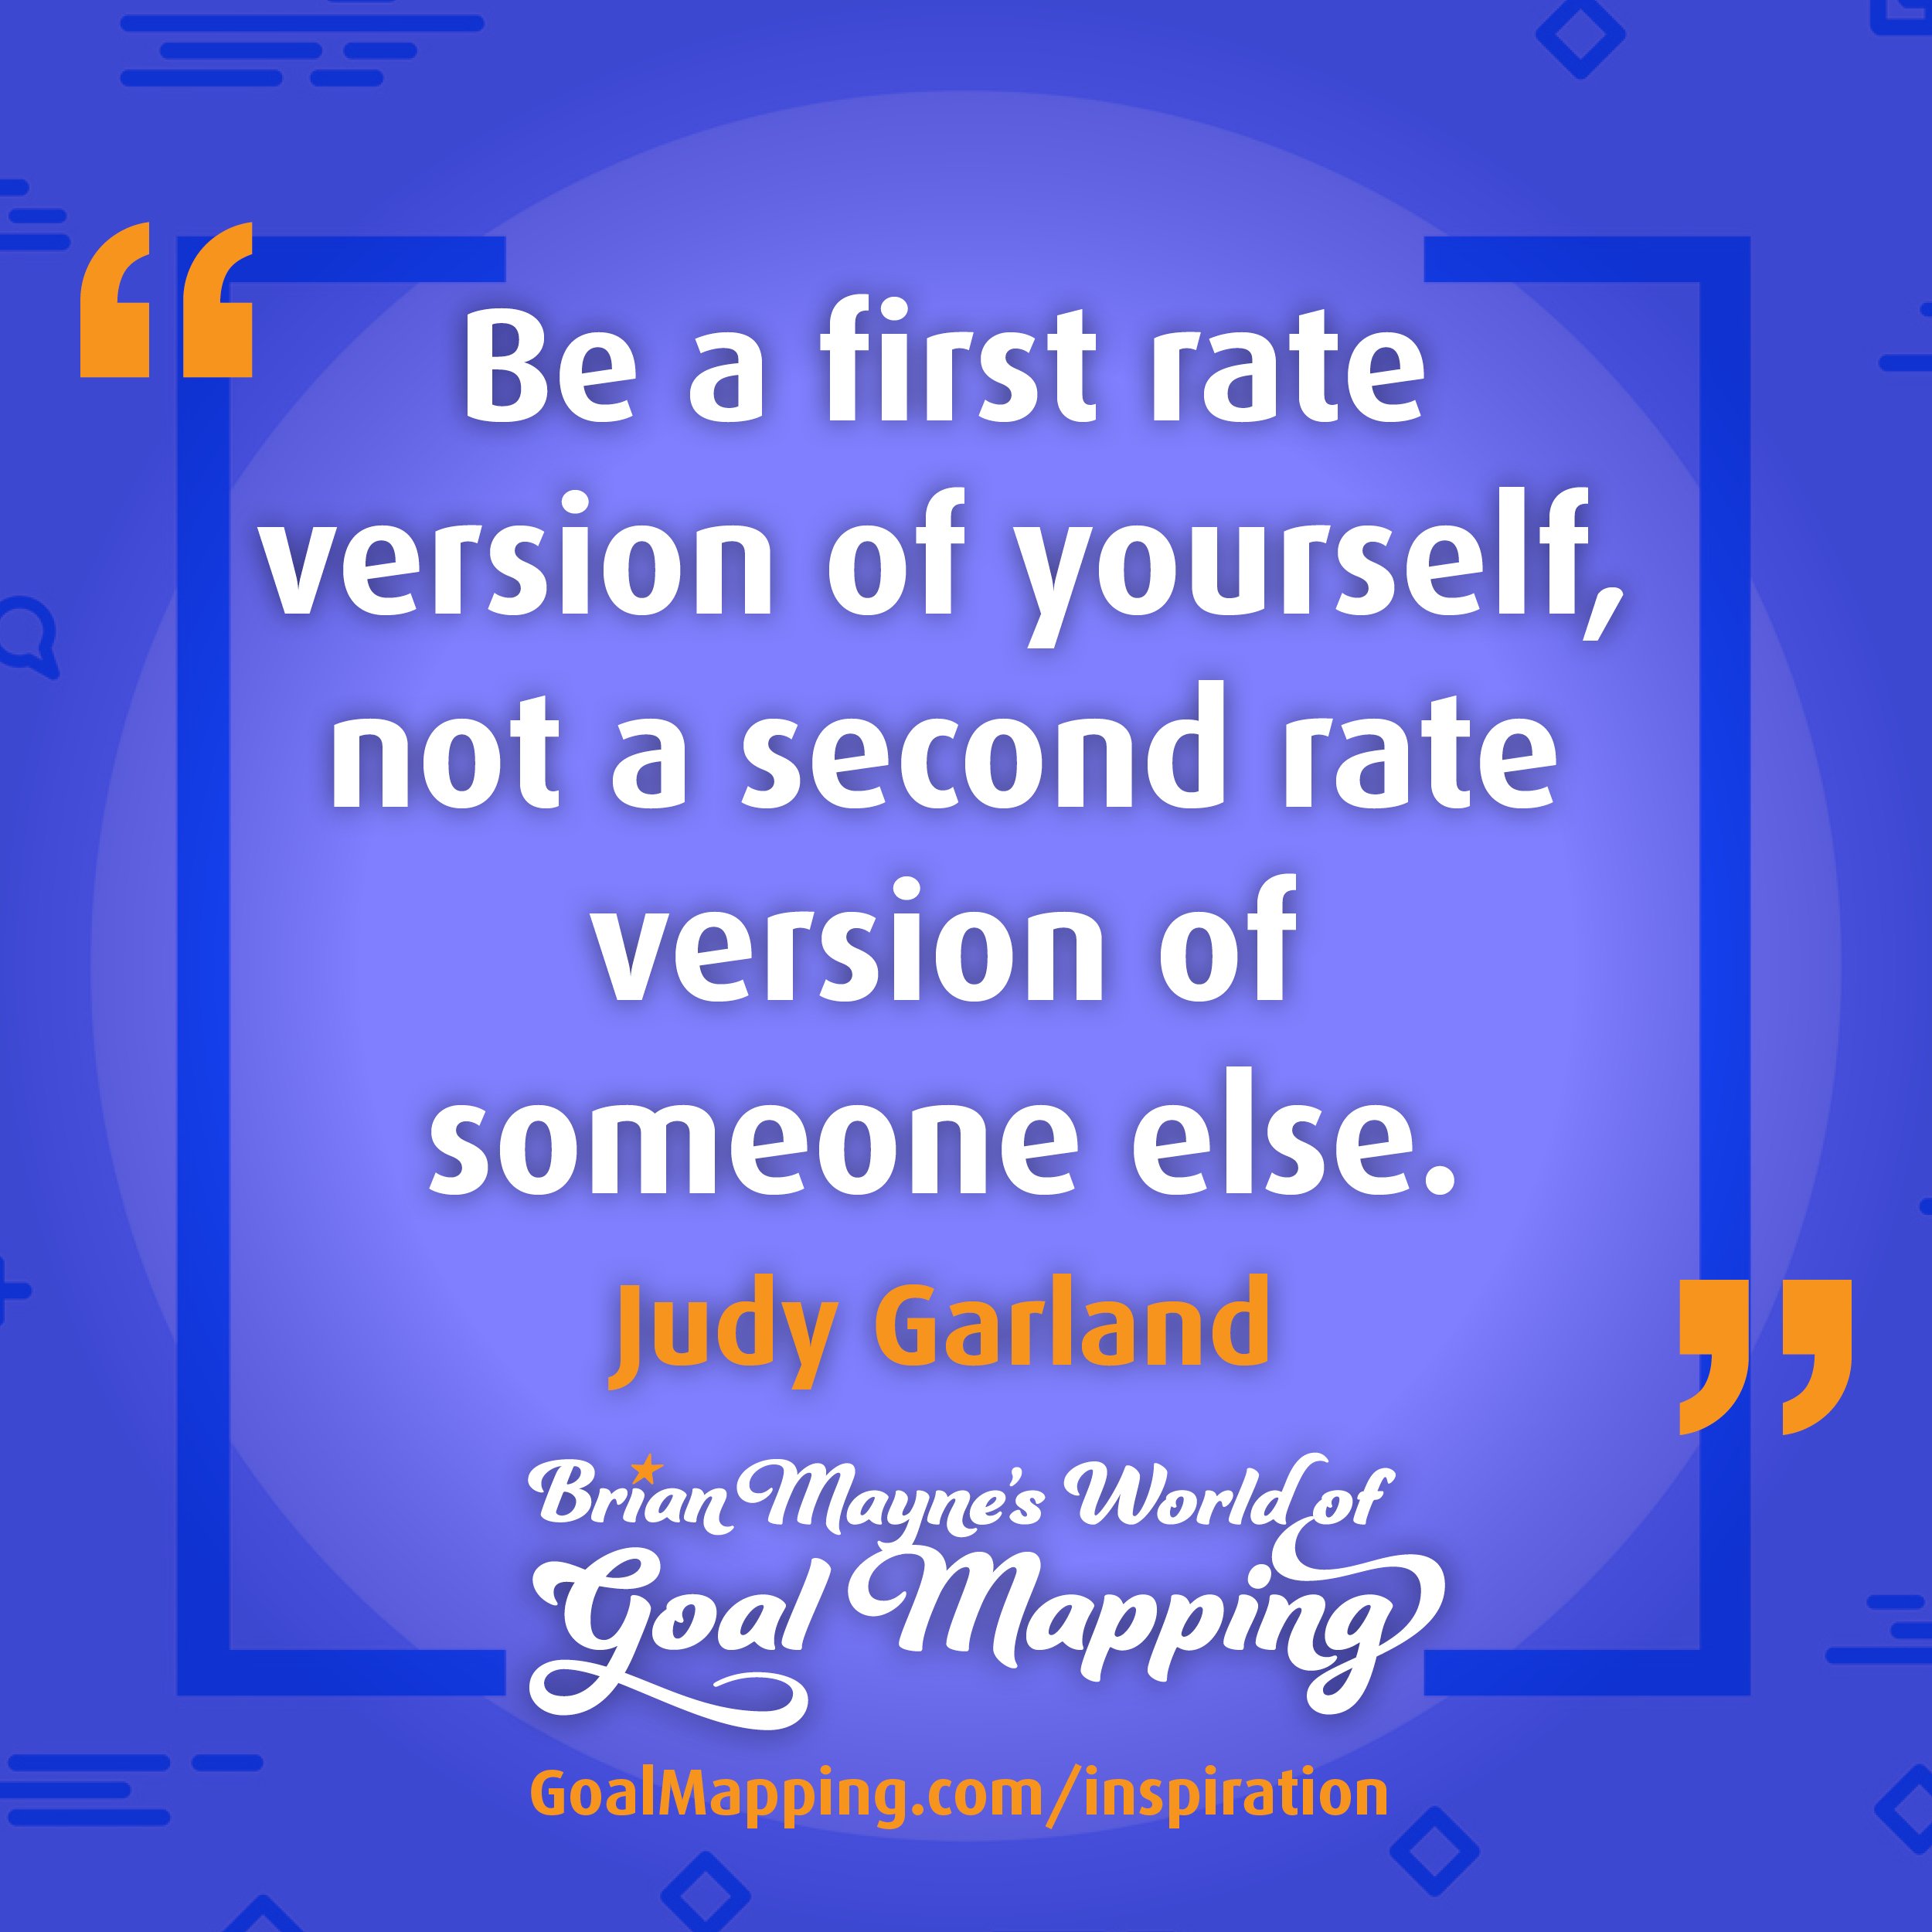 "Be a first rate version of yourself, not a second rate version of someone else." Judy Garland